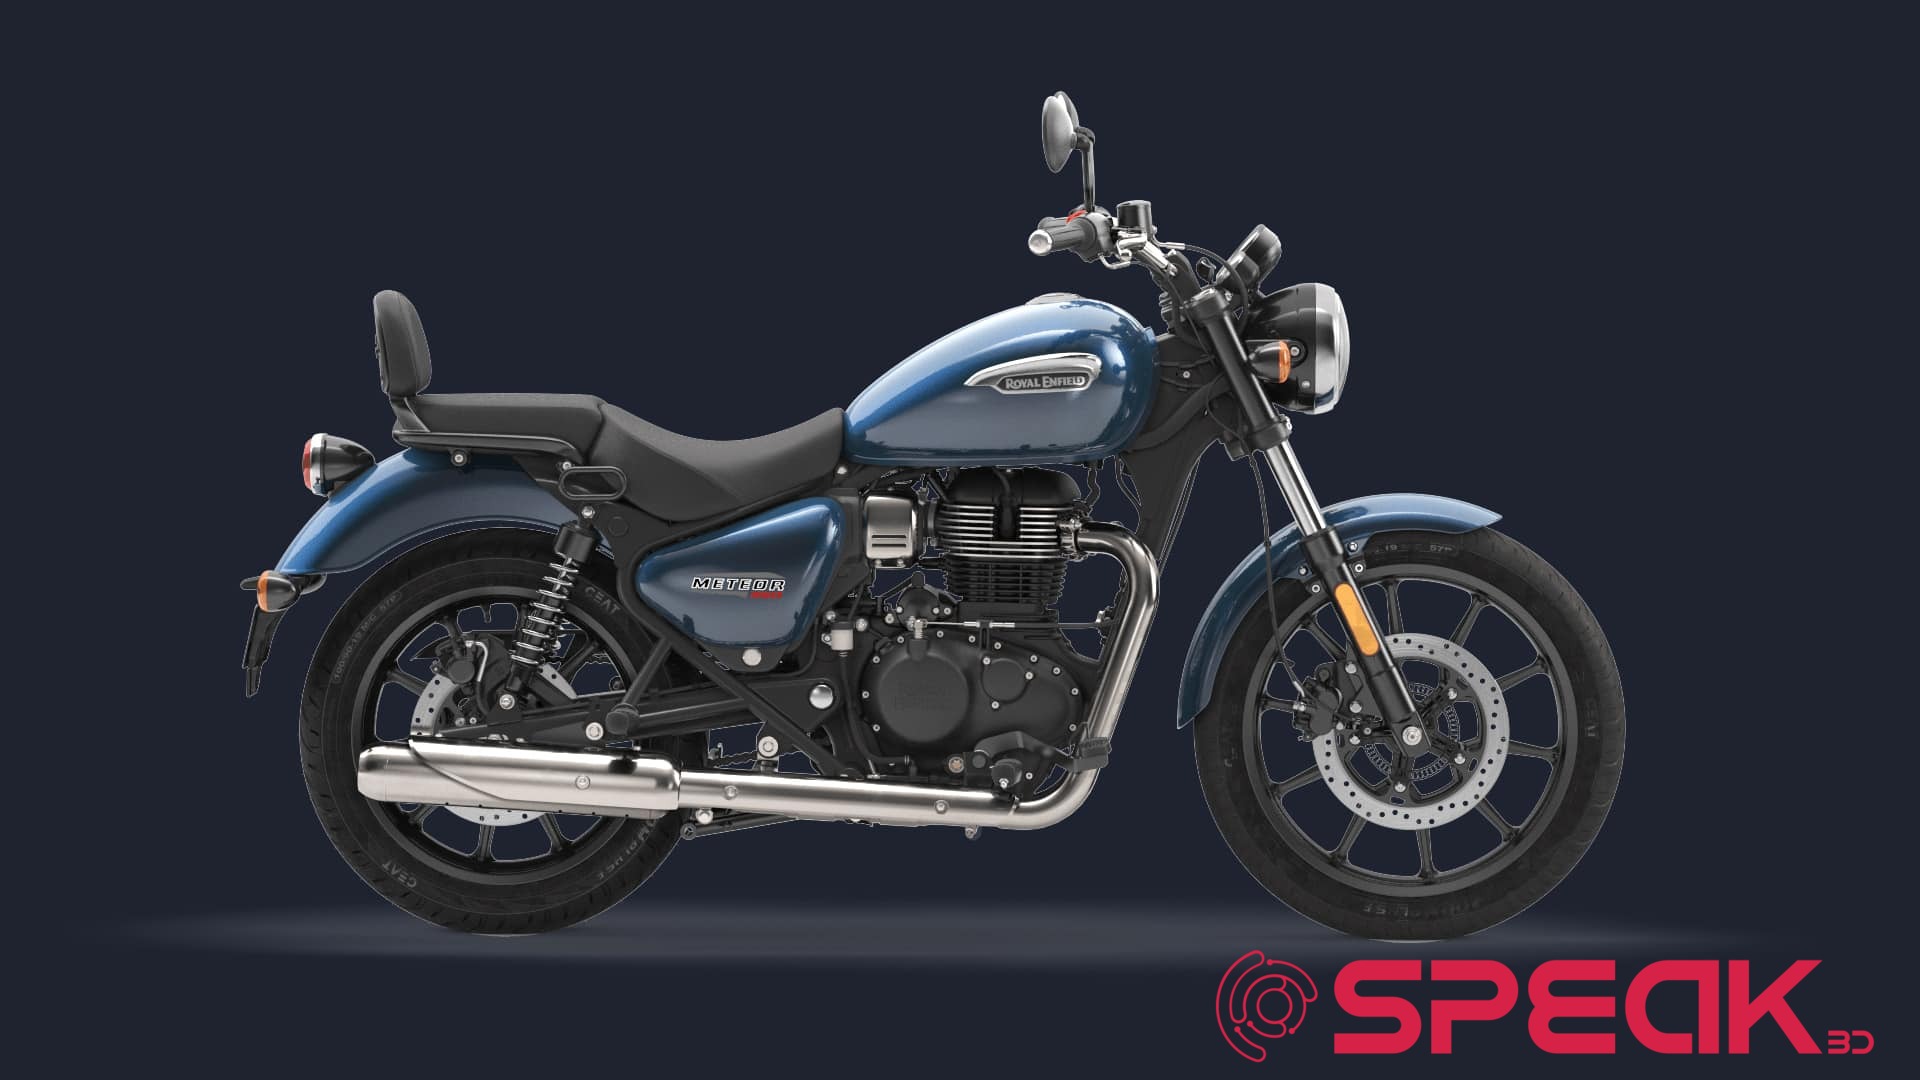 Royal Enfield Meteor 350 - Pictures